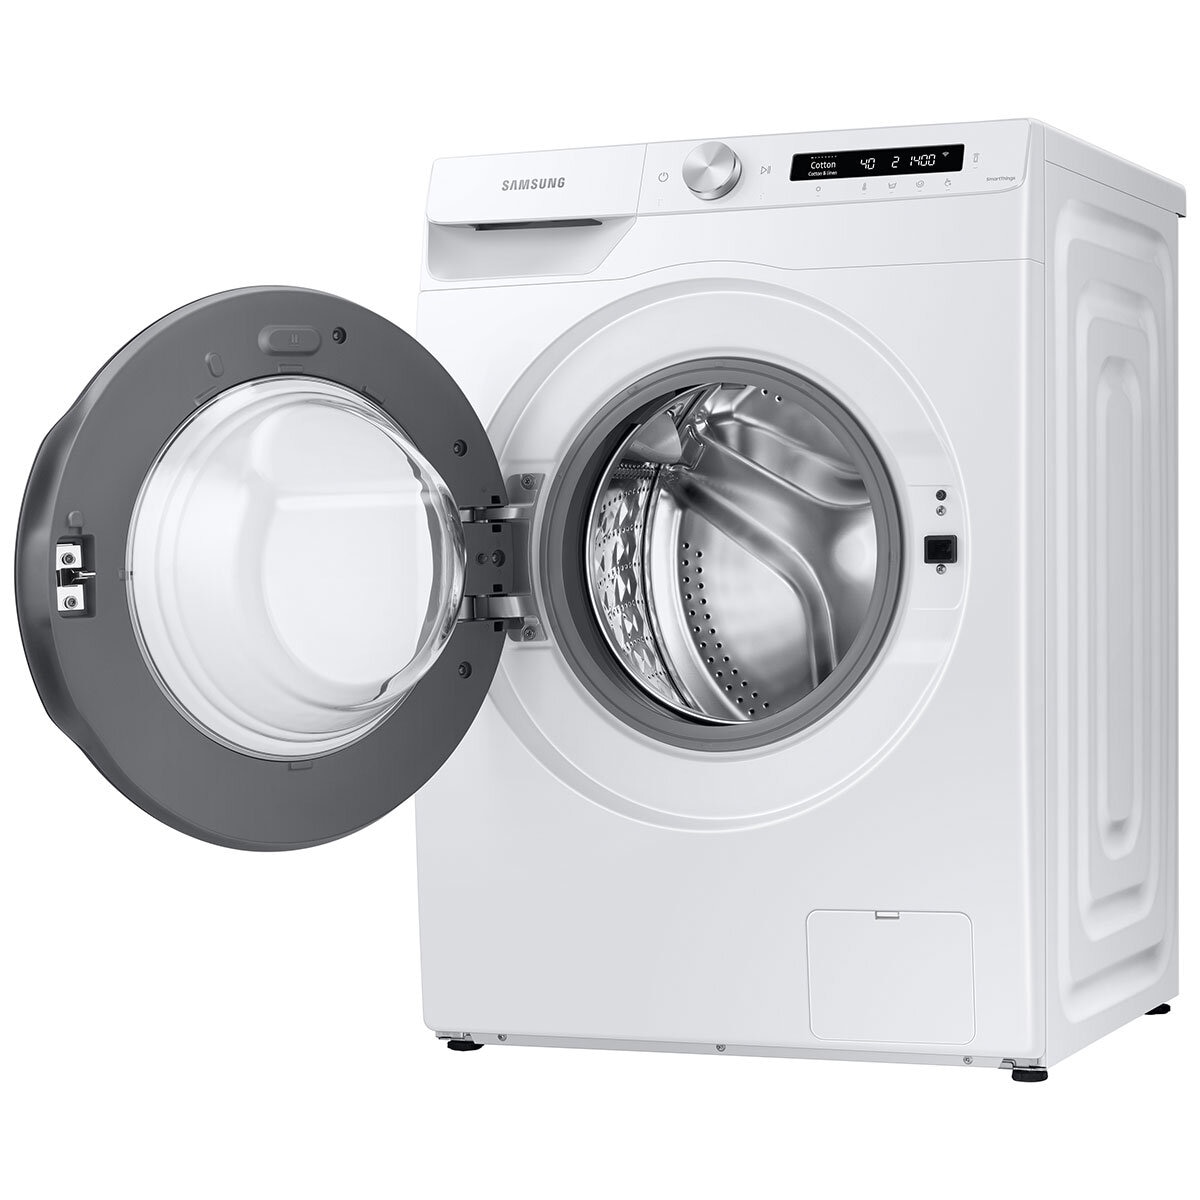 Samsung 9kg Front Load Smart Washer with Steam Wash Cycle WW90T504DAW